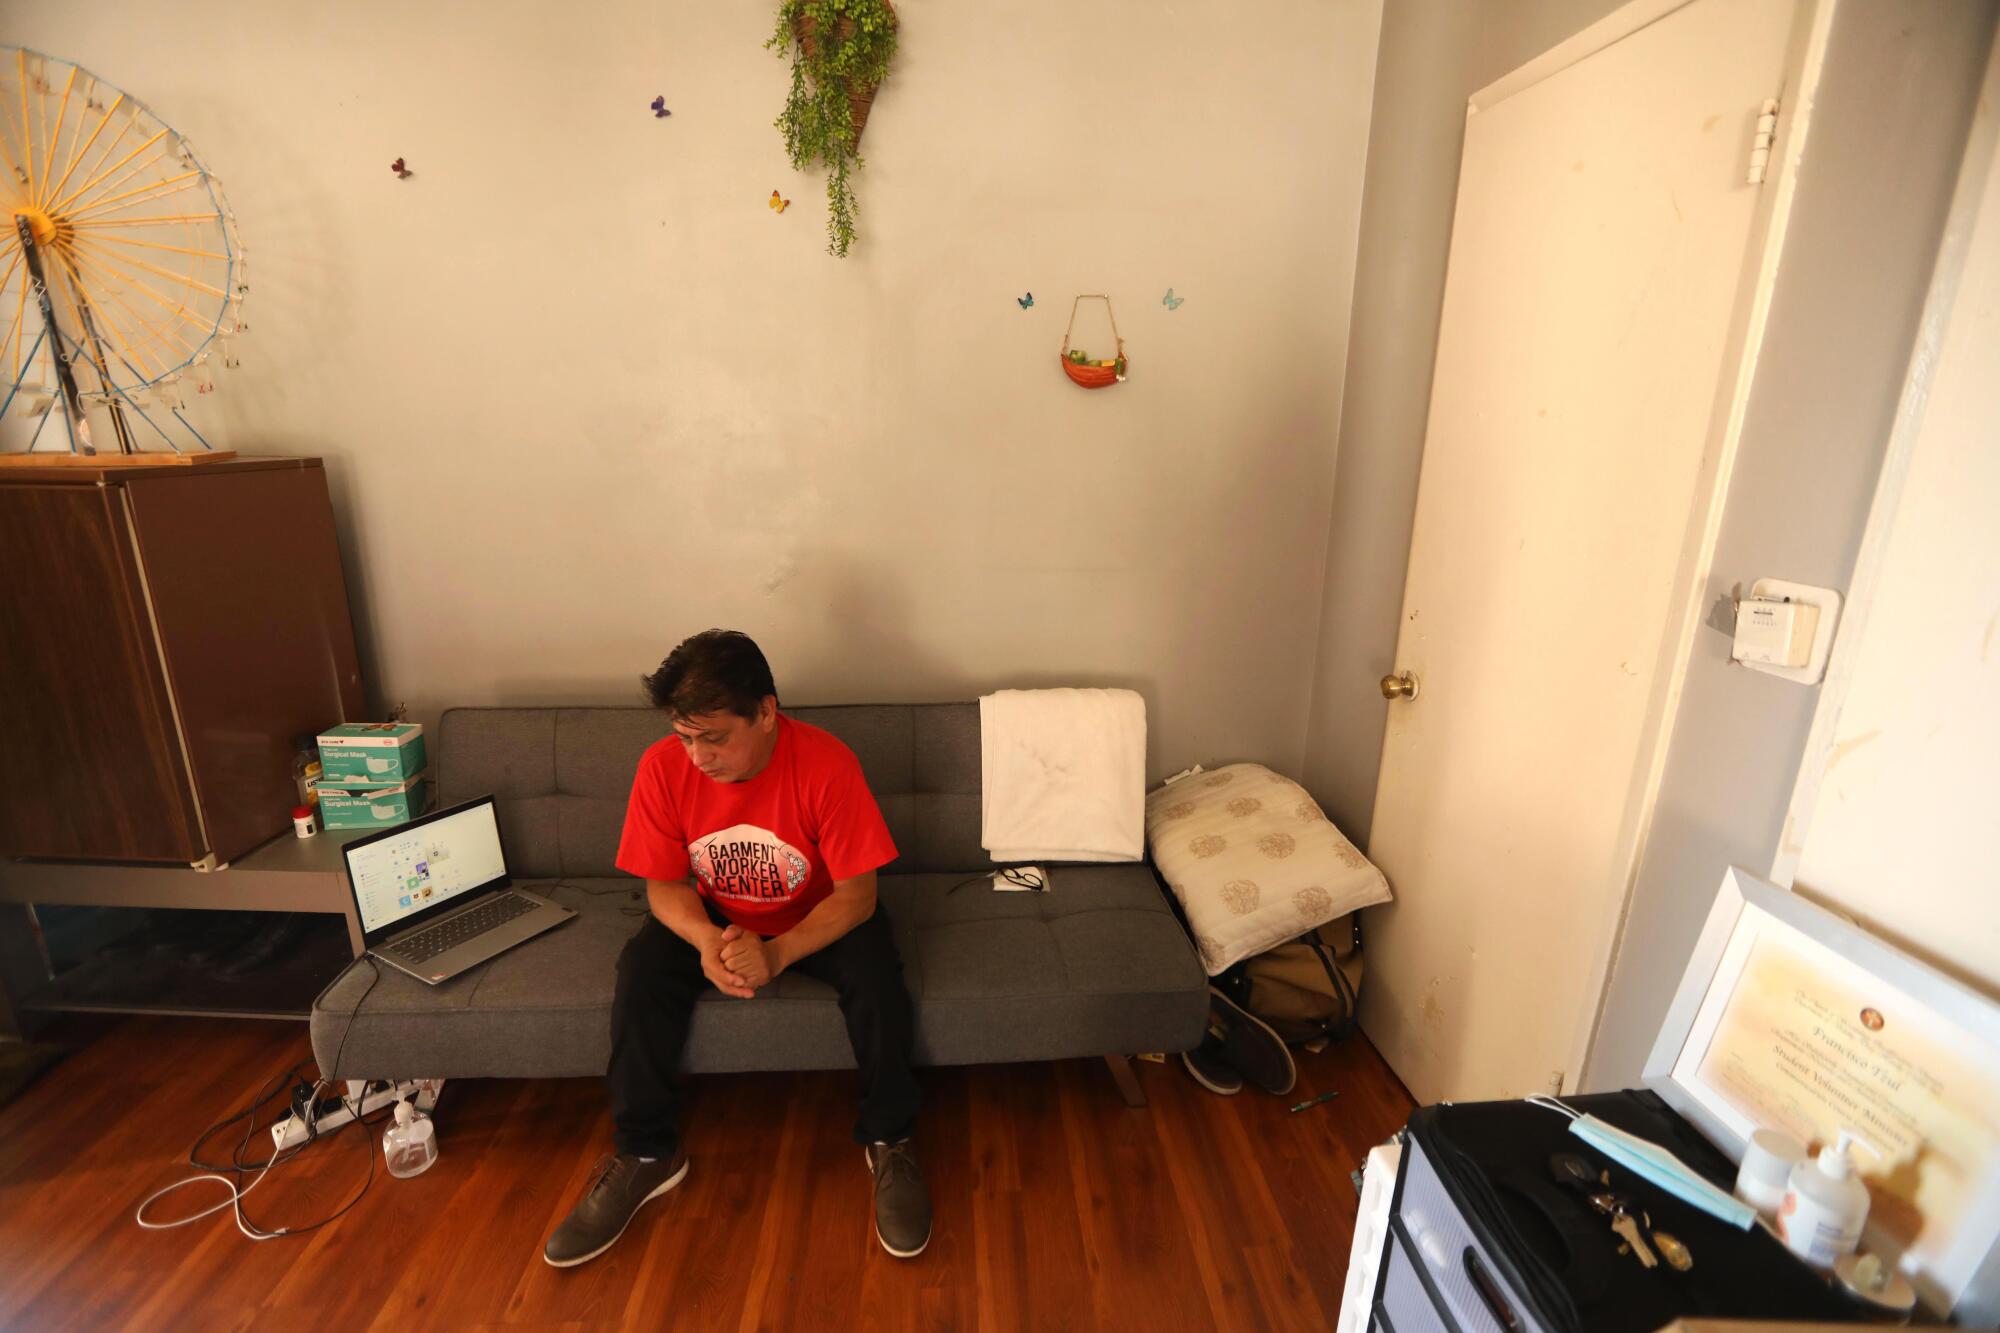 Francisco Tzul sits in the corner of an apartment he rents in North Hollywood.